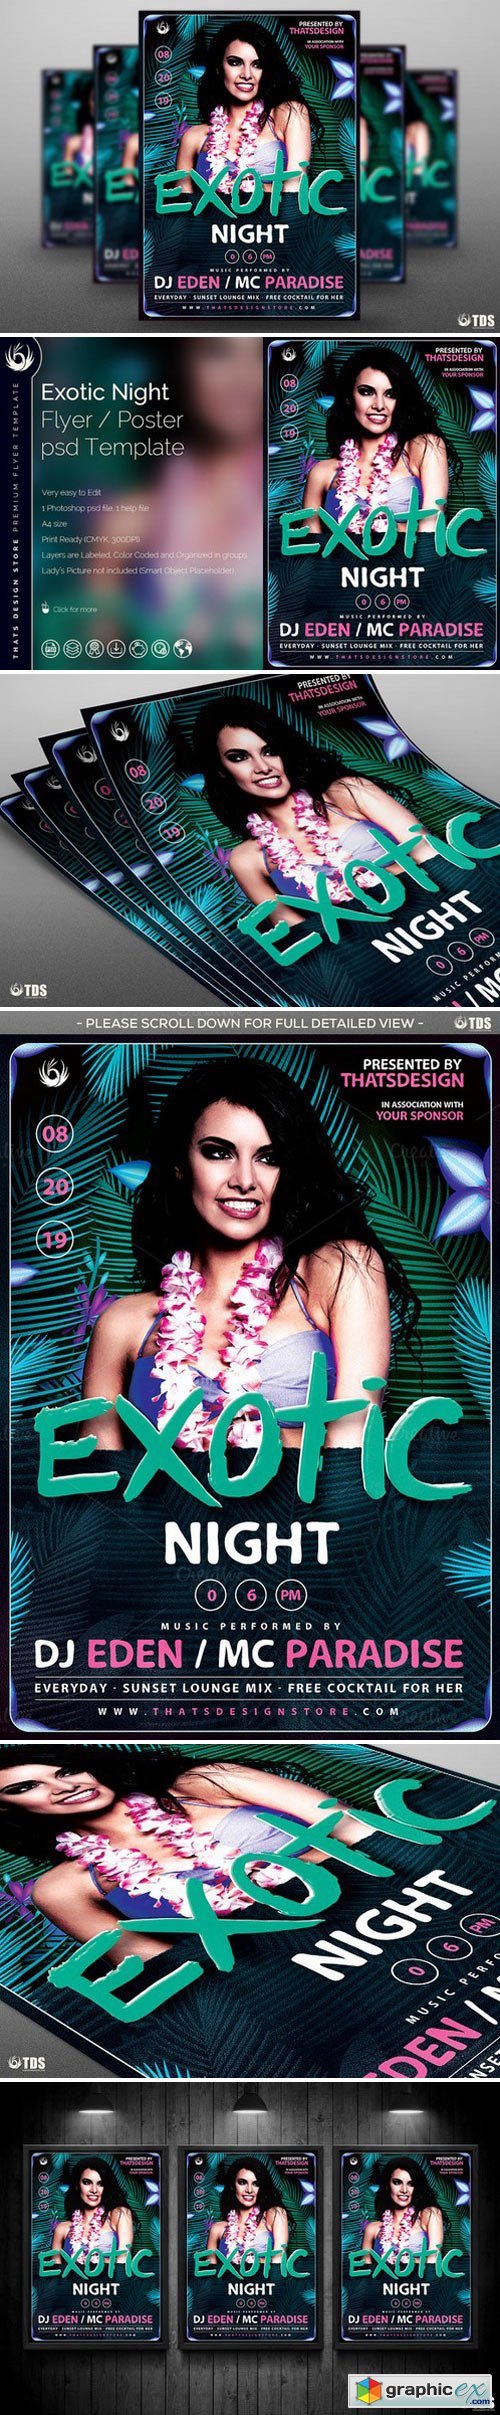 Exotic Night Flyer Template